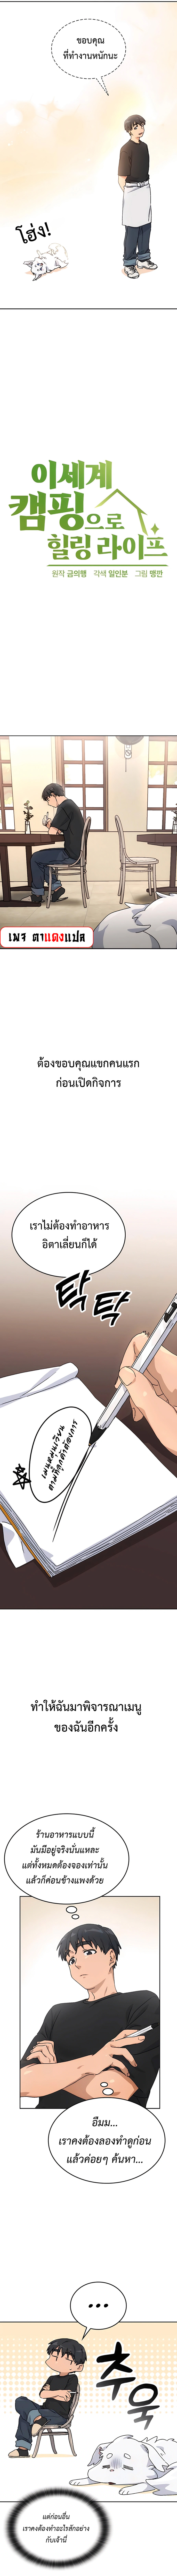 Healing Life Through Camping in Another World ตอนที่ 3 (8)